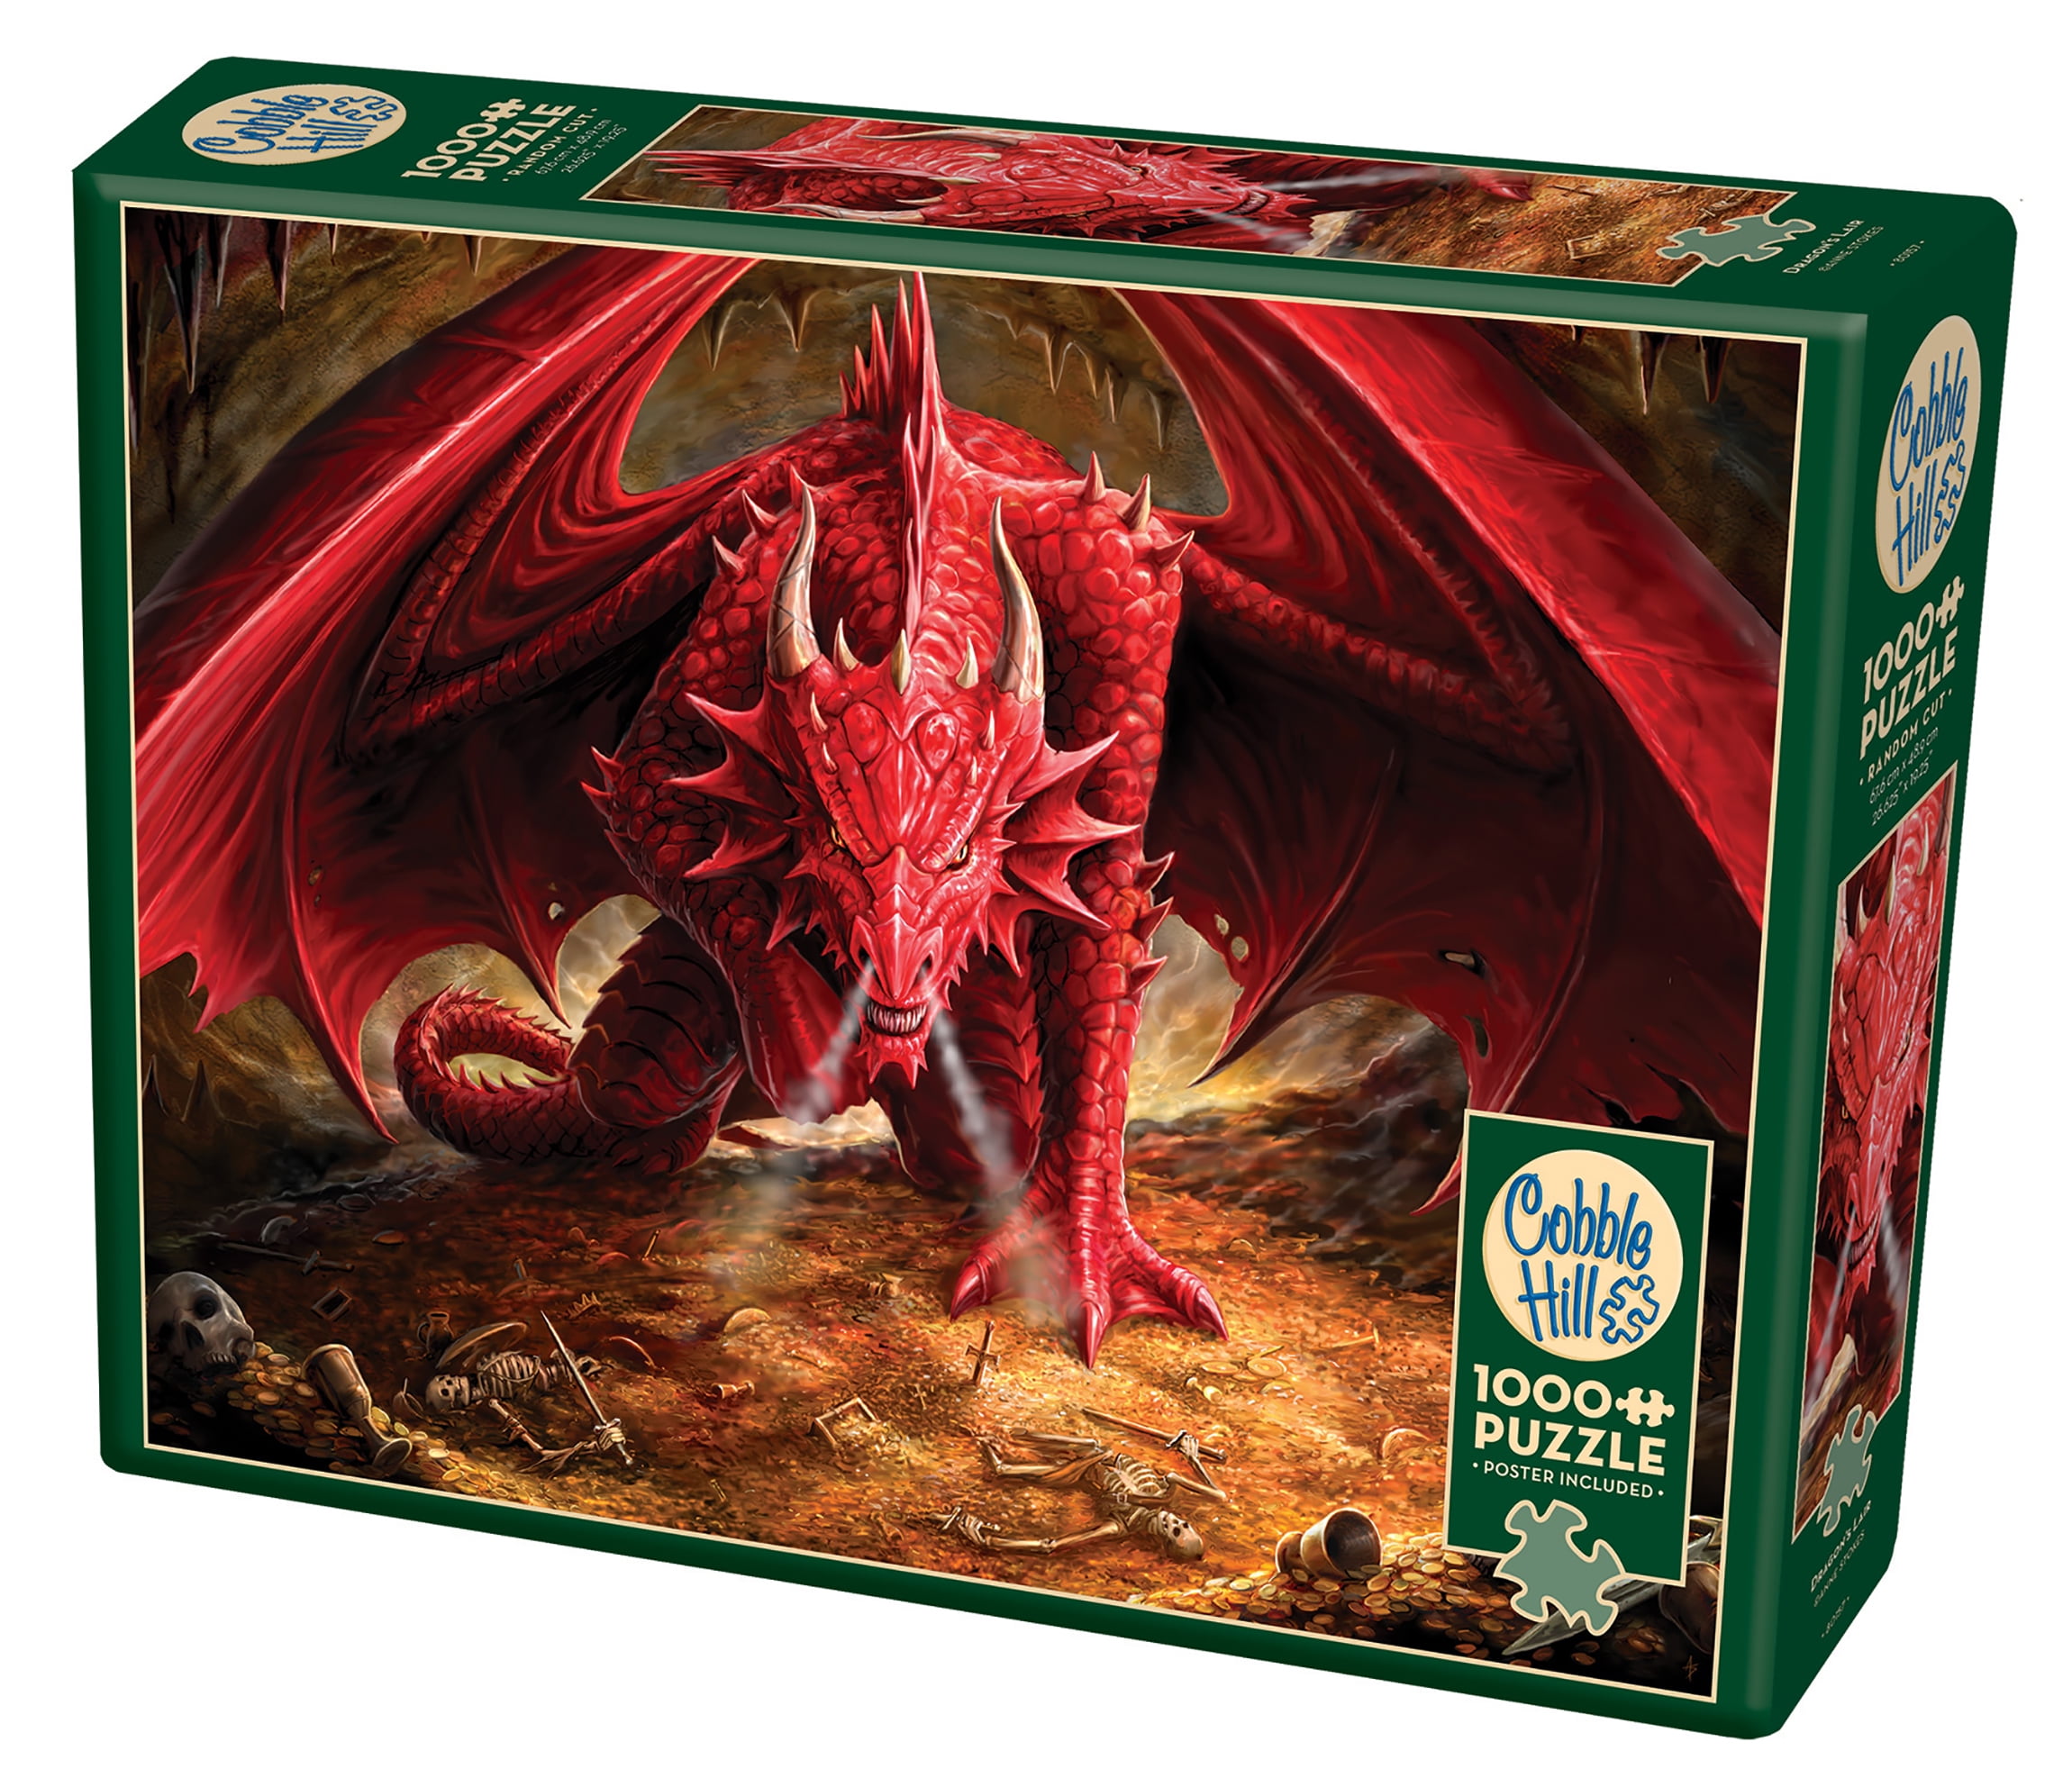 Dragon Puzzle 1000 Piece Dragonforge Jigsaw by Cobble Hill Puzzle Company 